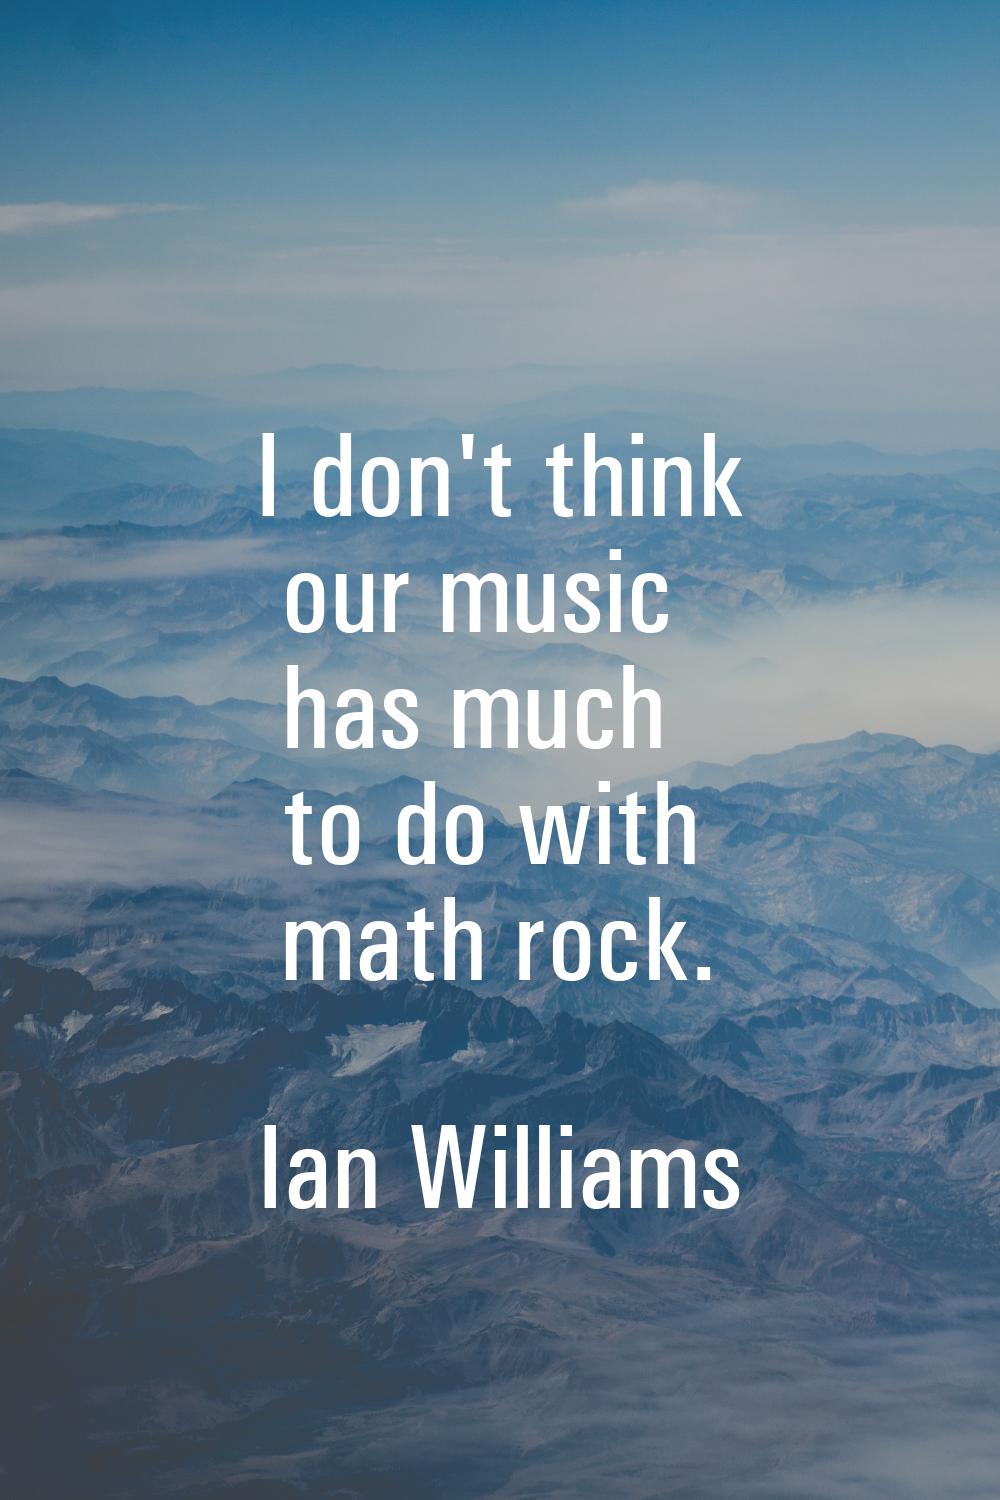 I don't think our music has much to do with math rock.